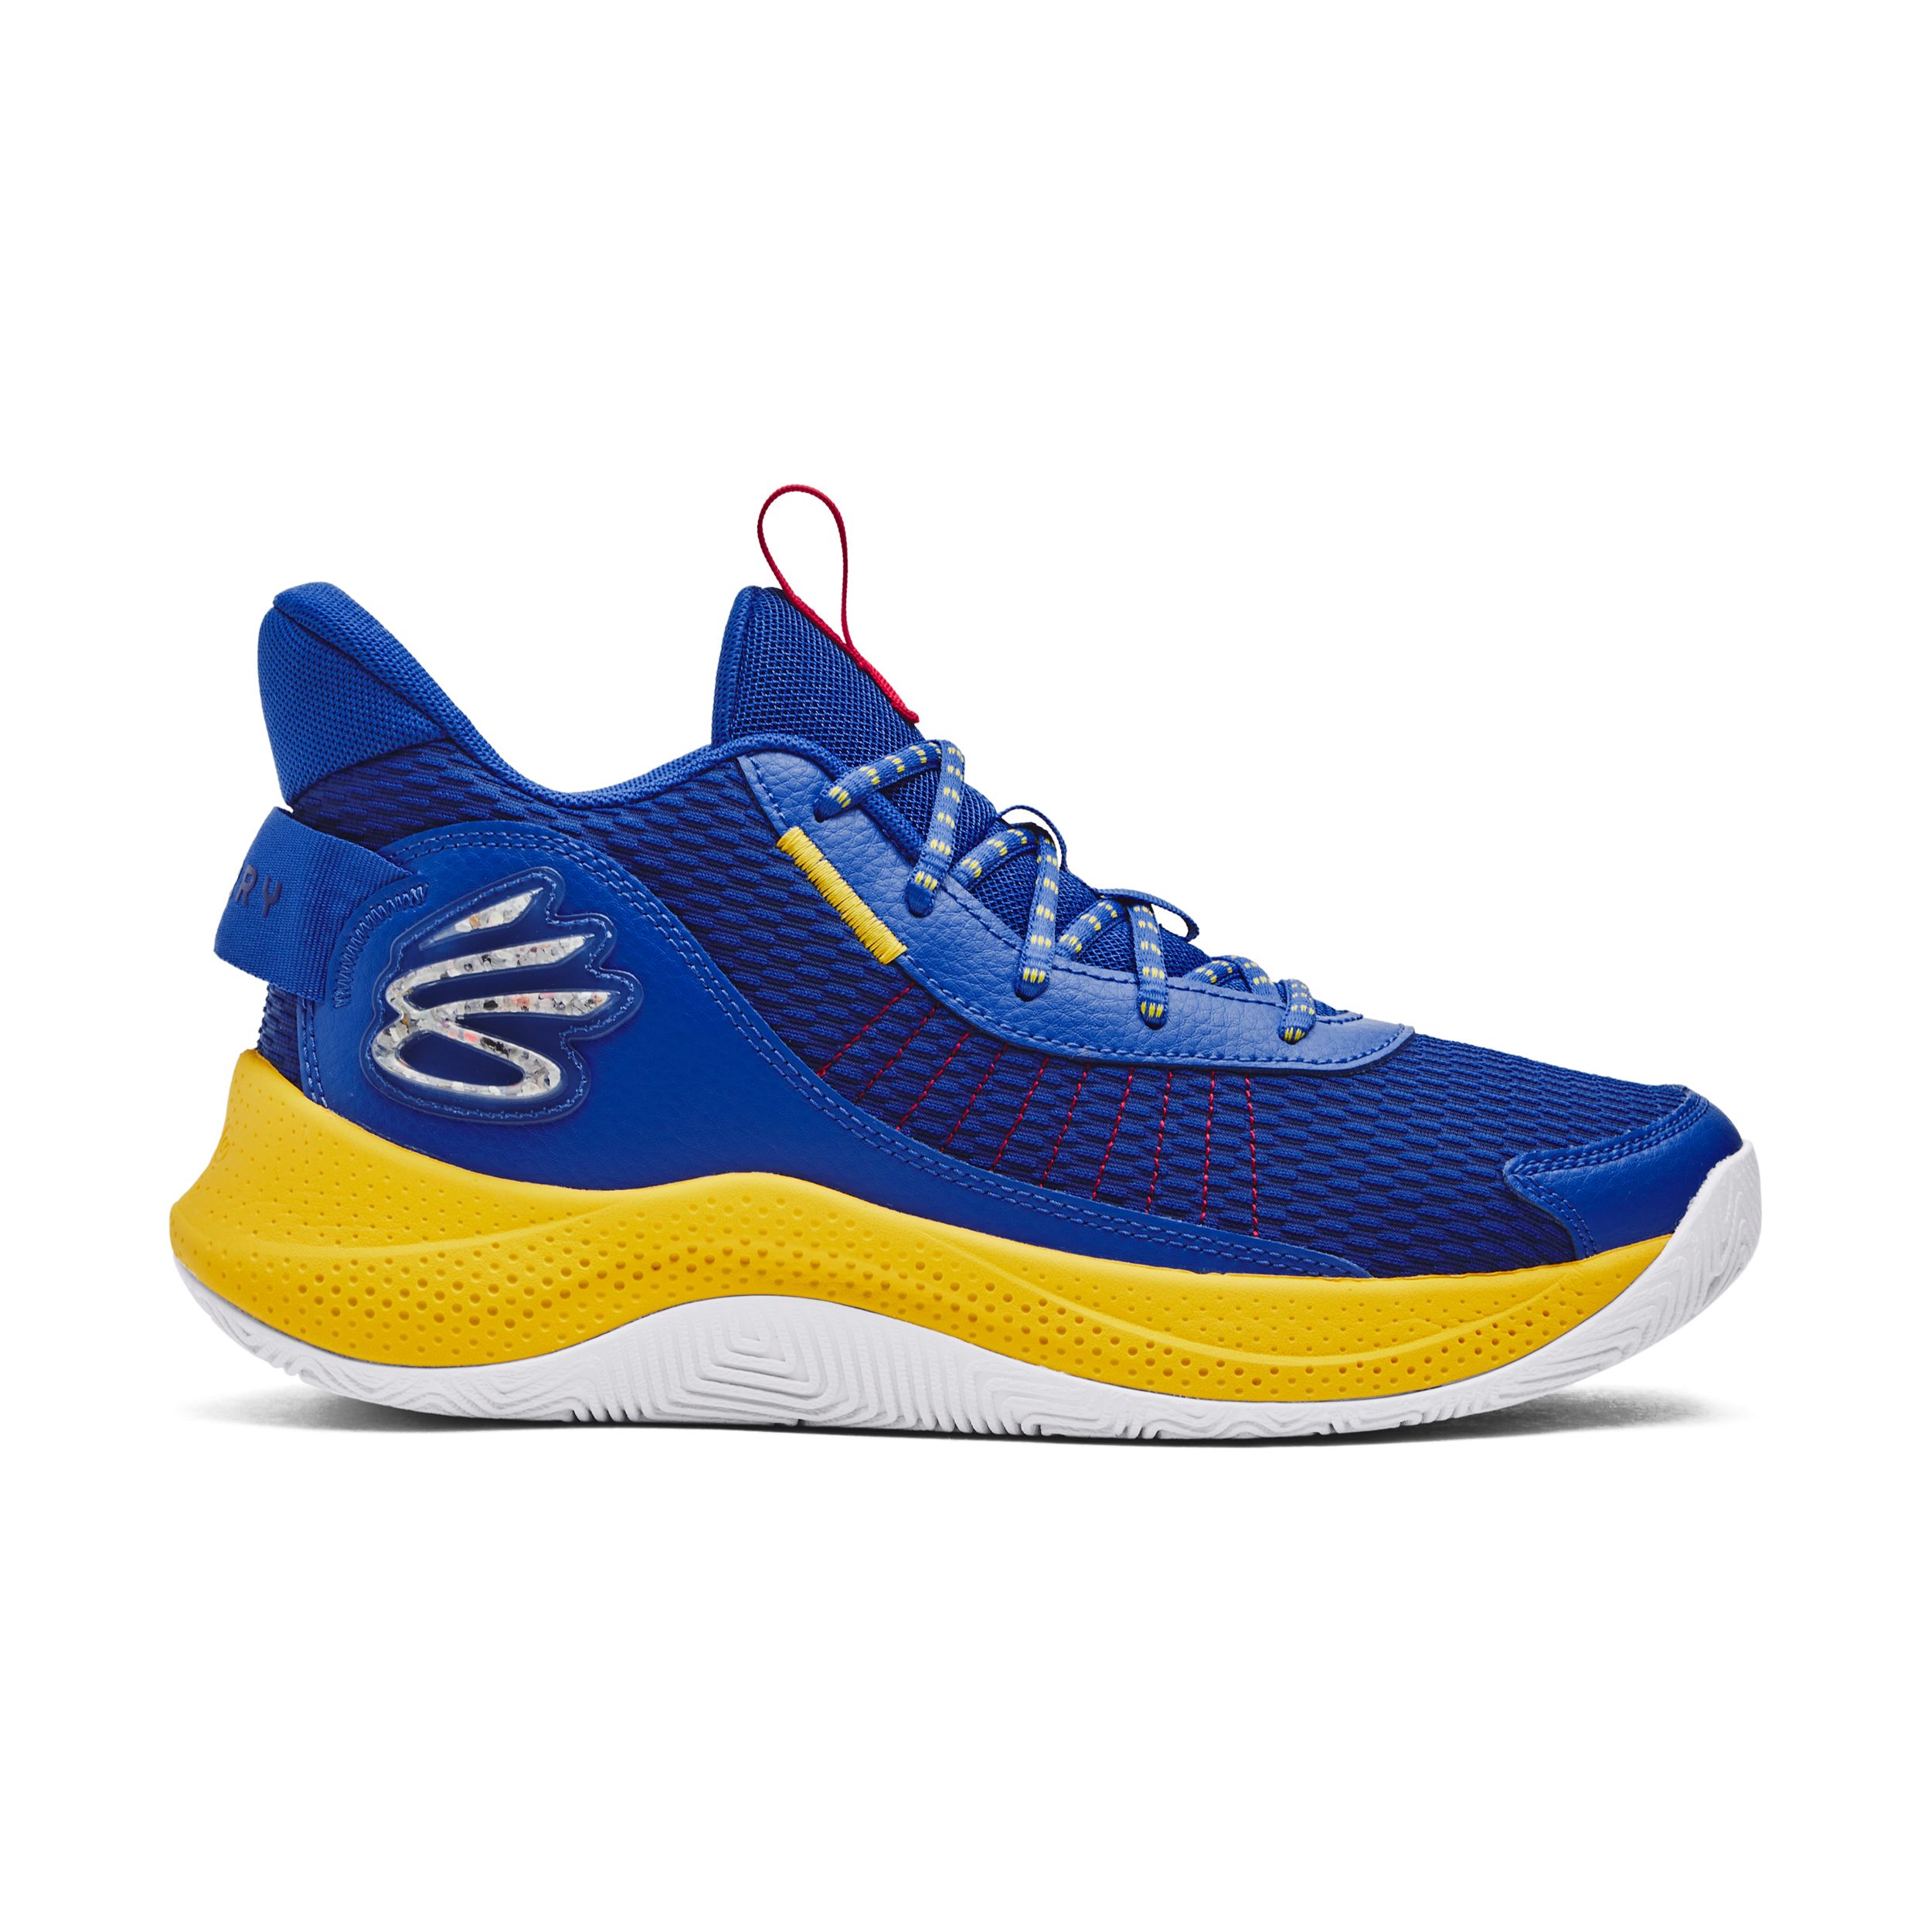 Image of Under Armour Curry 3Z7 Basketball Shoes